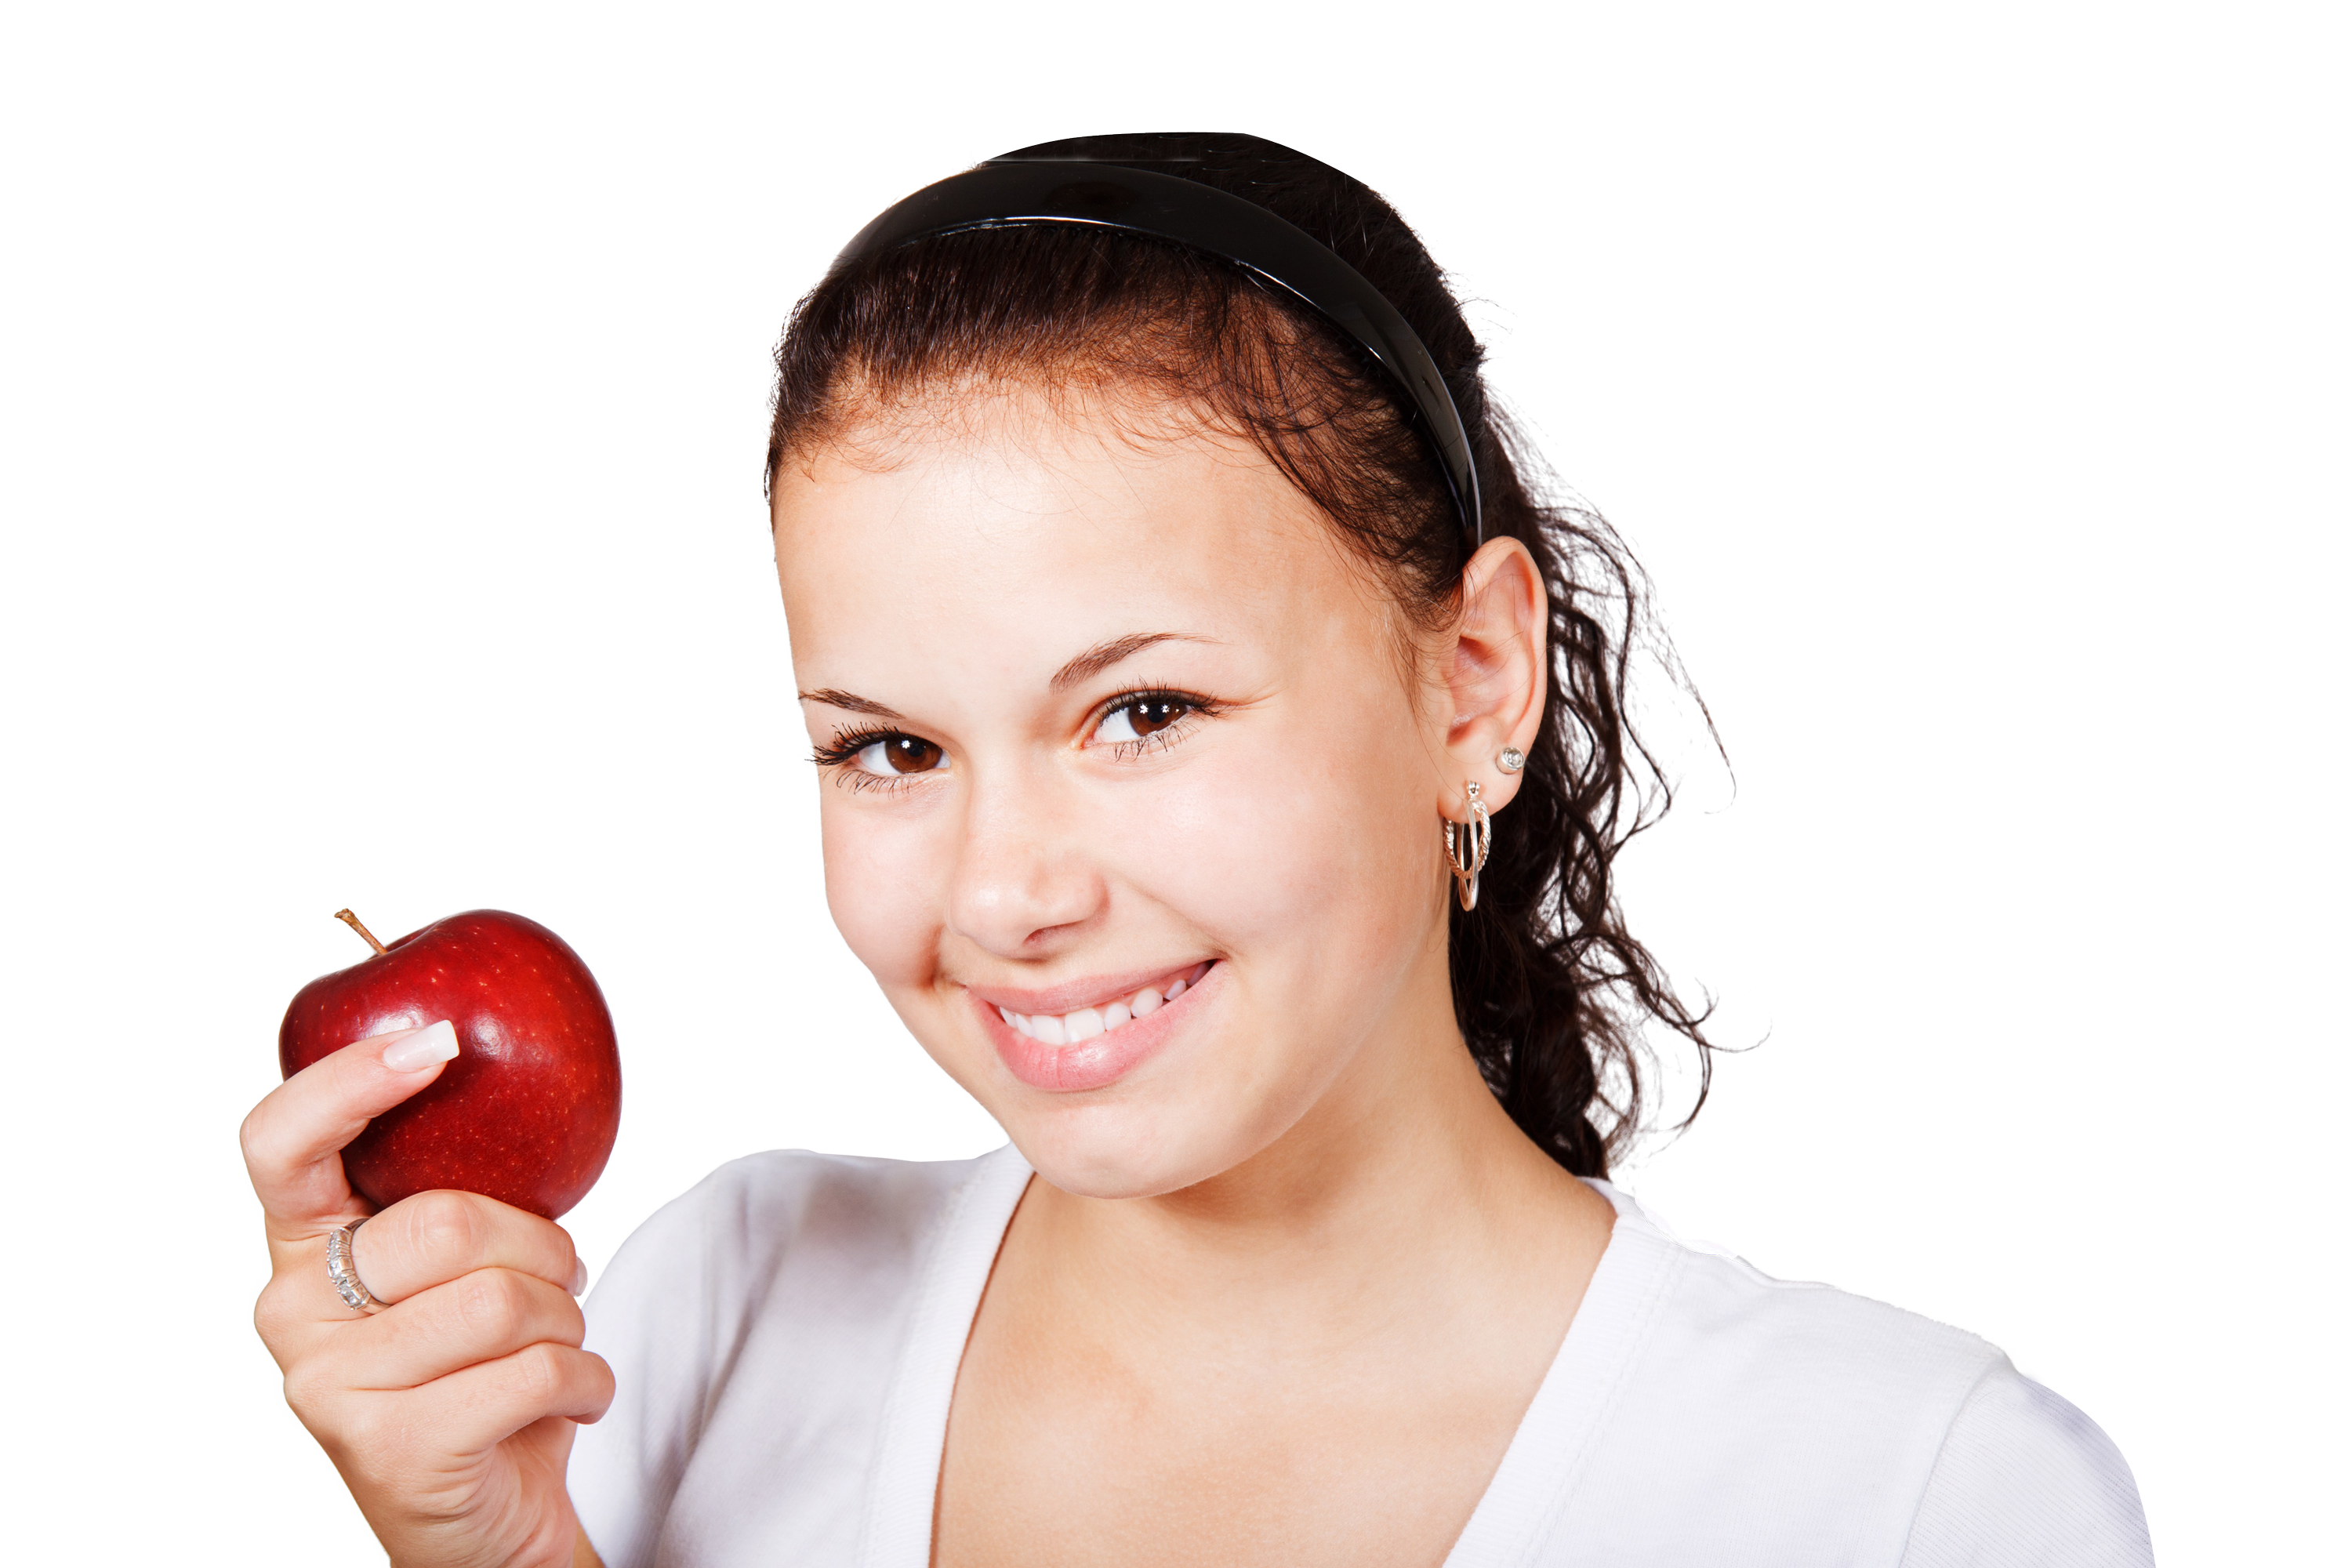 Girl with Red Apple